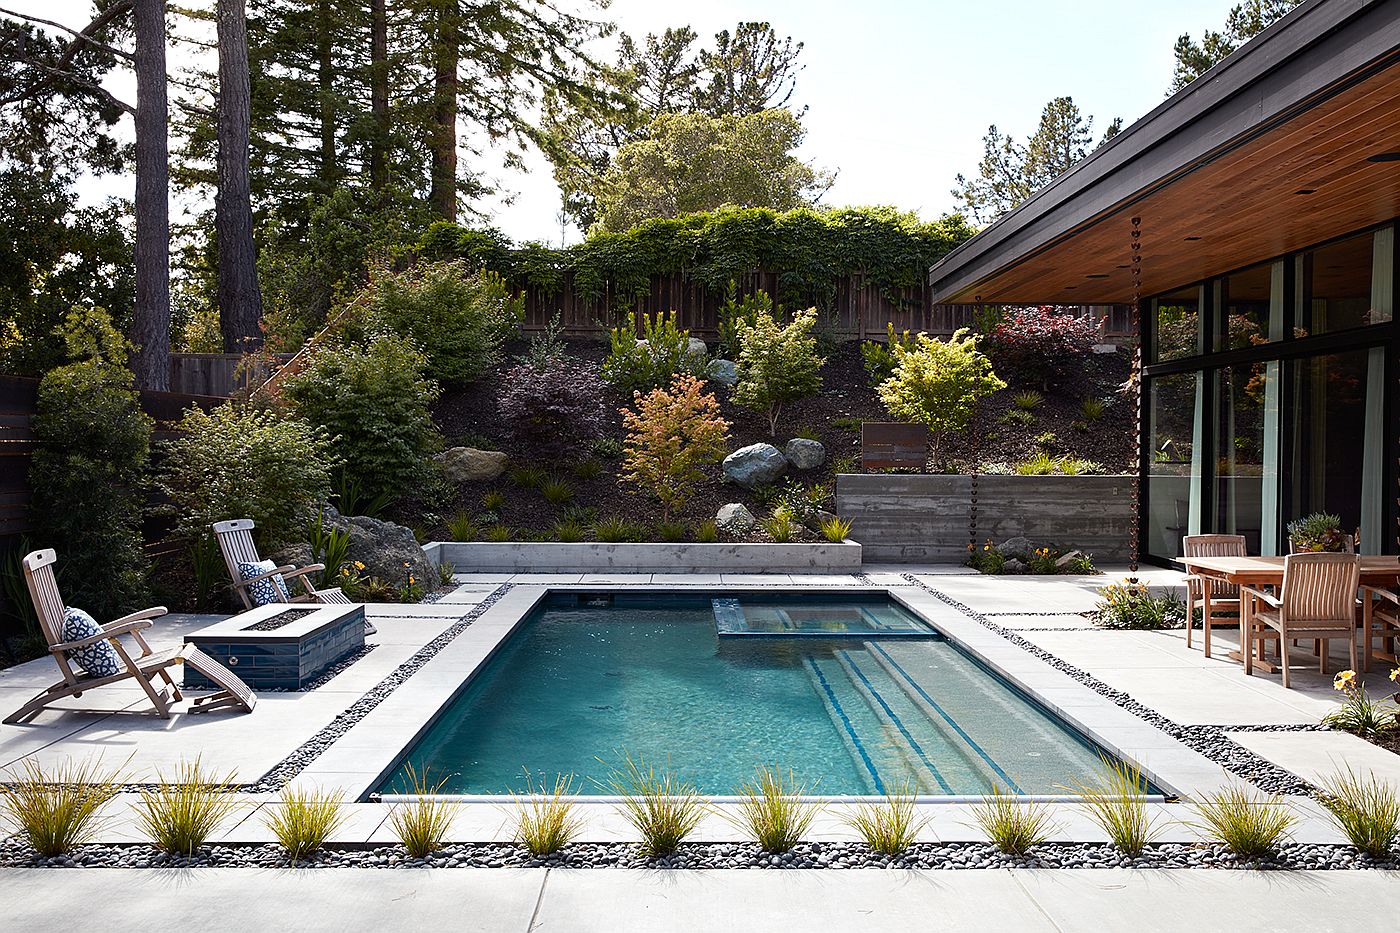 Modern small pool complements the Eichler-inspired Californian home perfectly